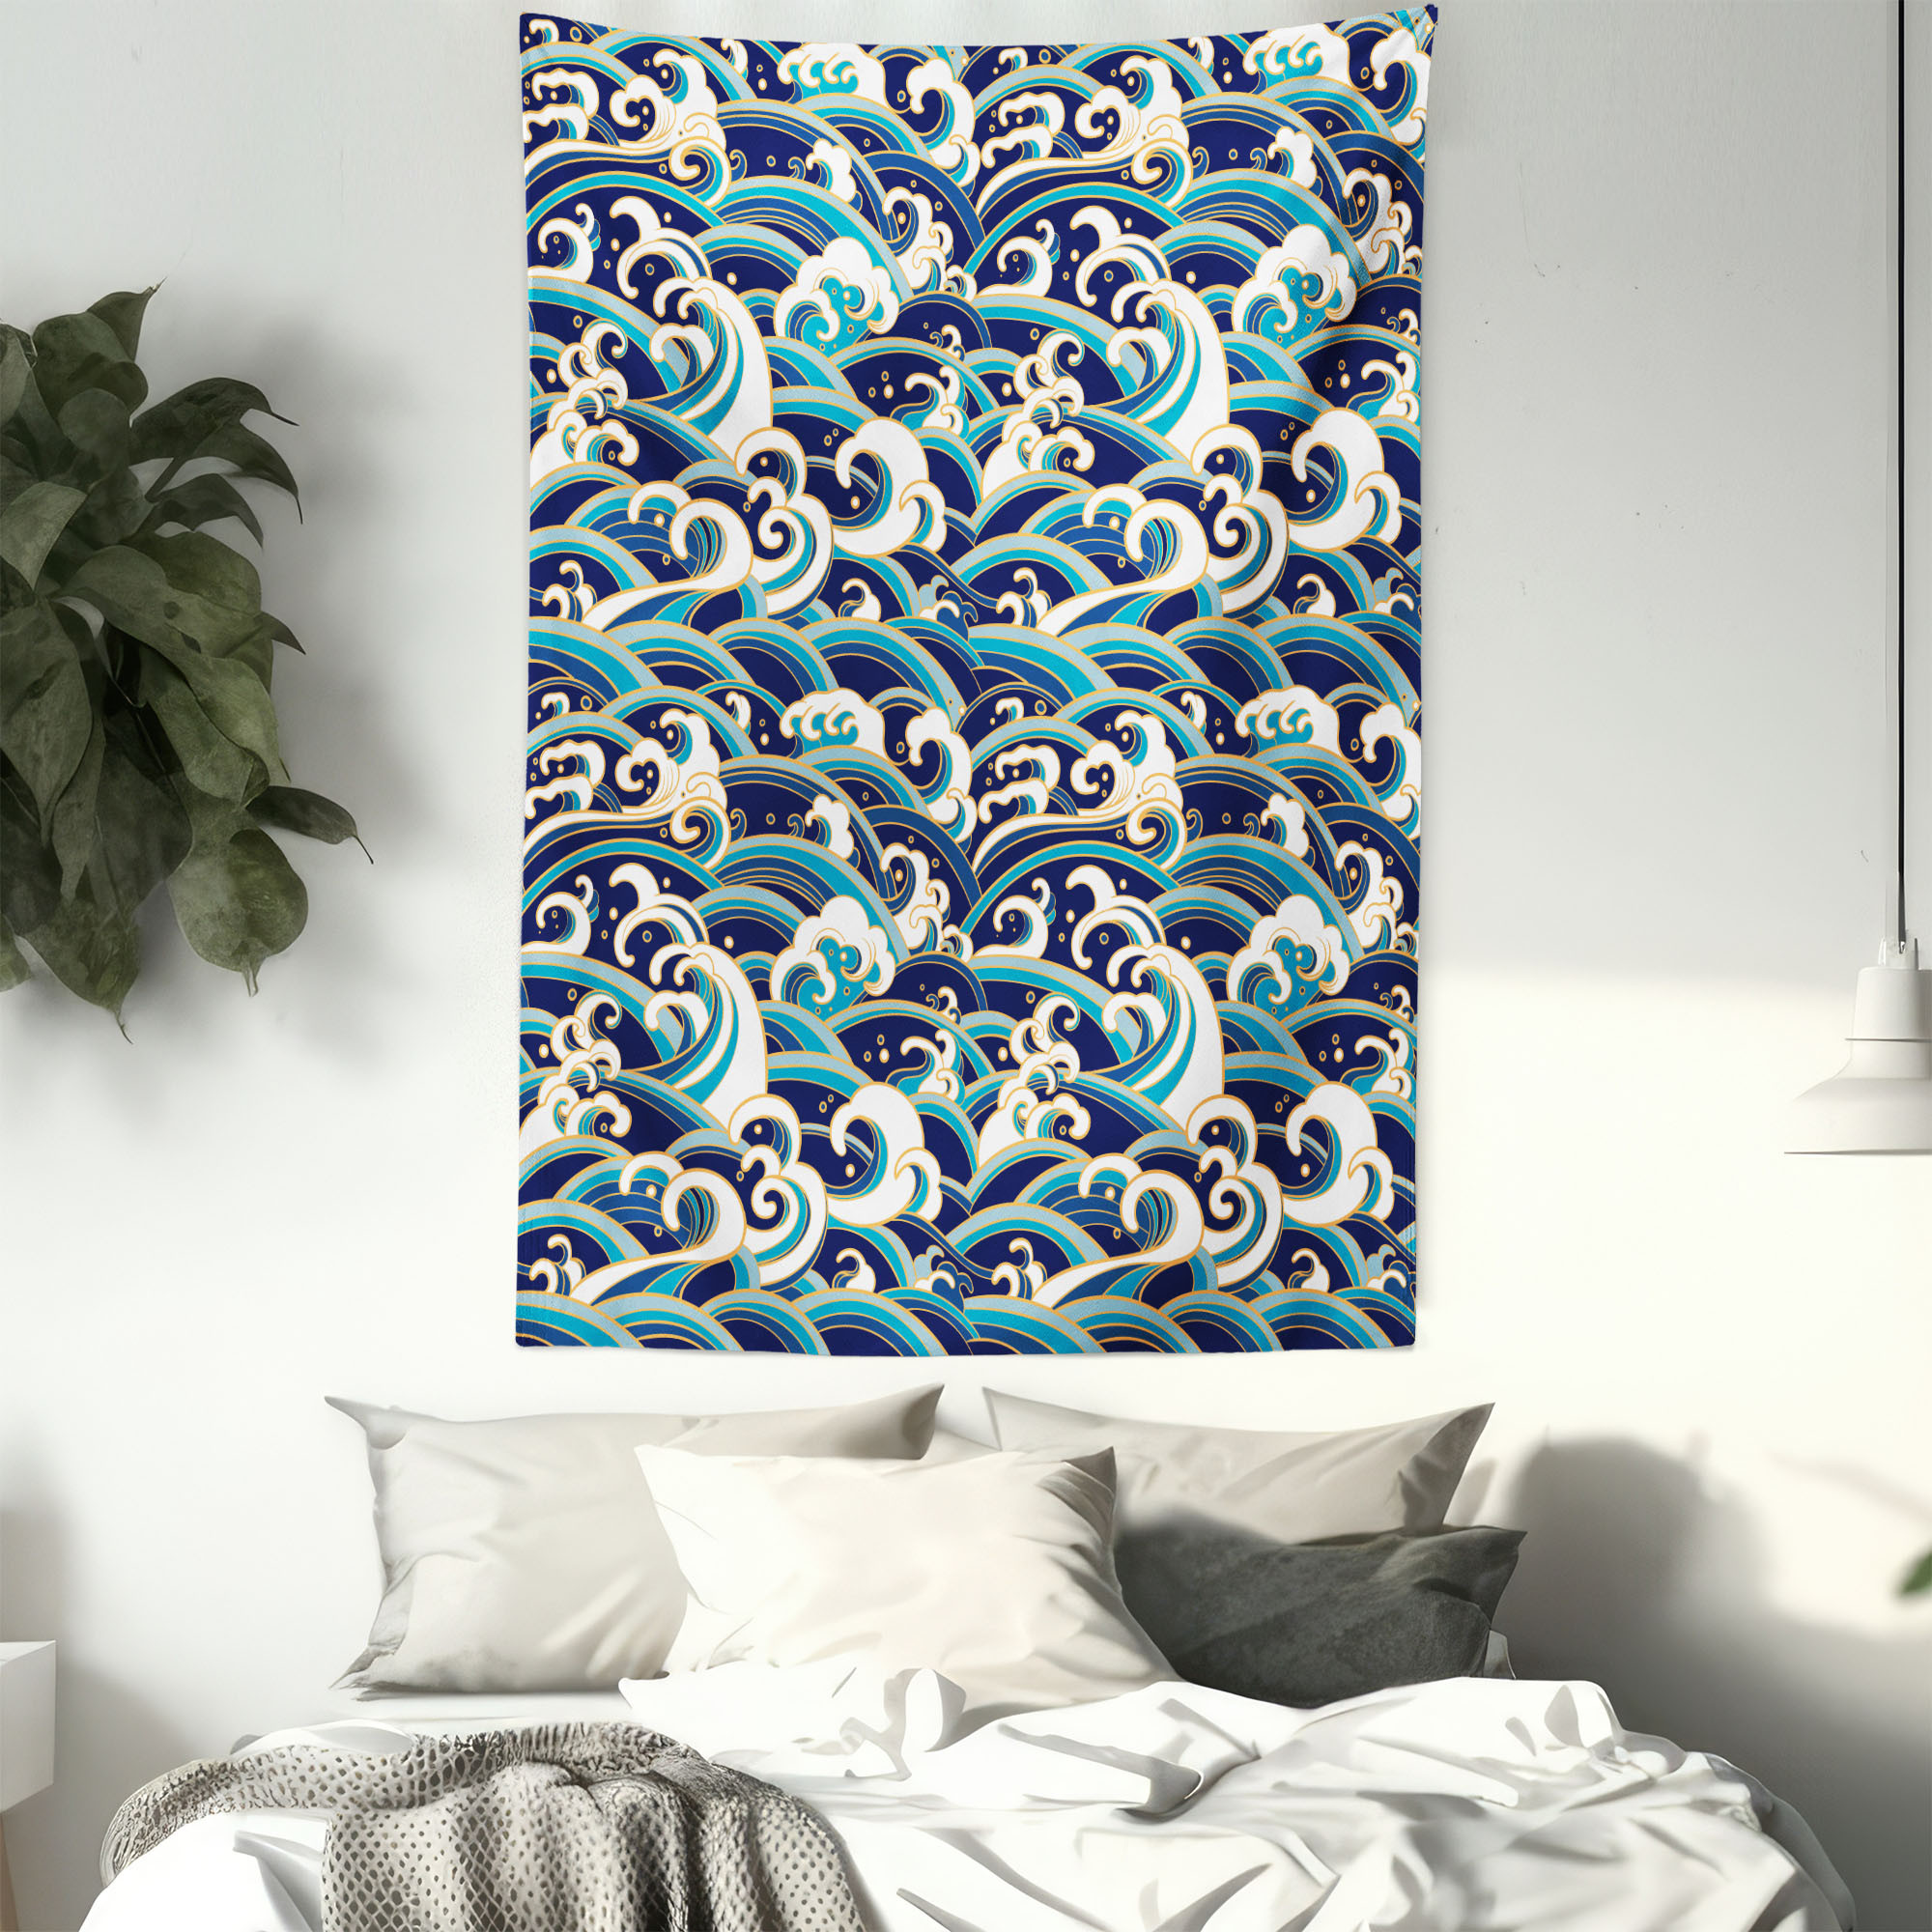 Nautical Tapestry, Traditional Oriental Style Ocean Waves Pattern with Foam and Splashes Print, Wall Hanging for Bedroom Living Room Dorm Decor, 40W X 60L Inches, Blue and White, by Ambesonne - image 3 of 5